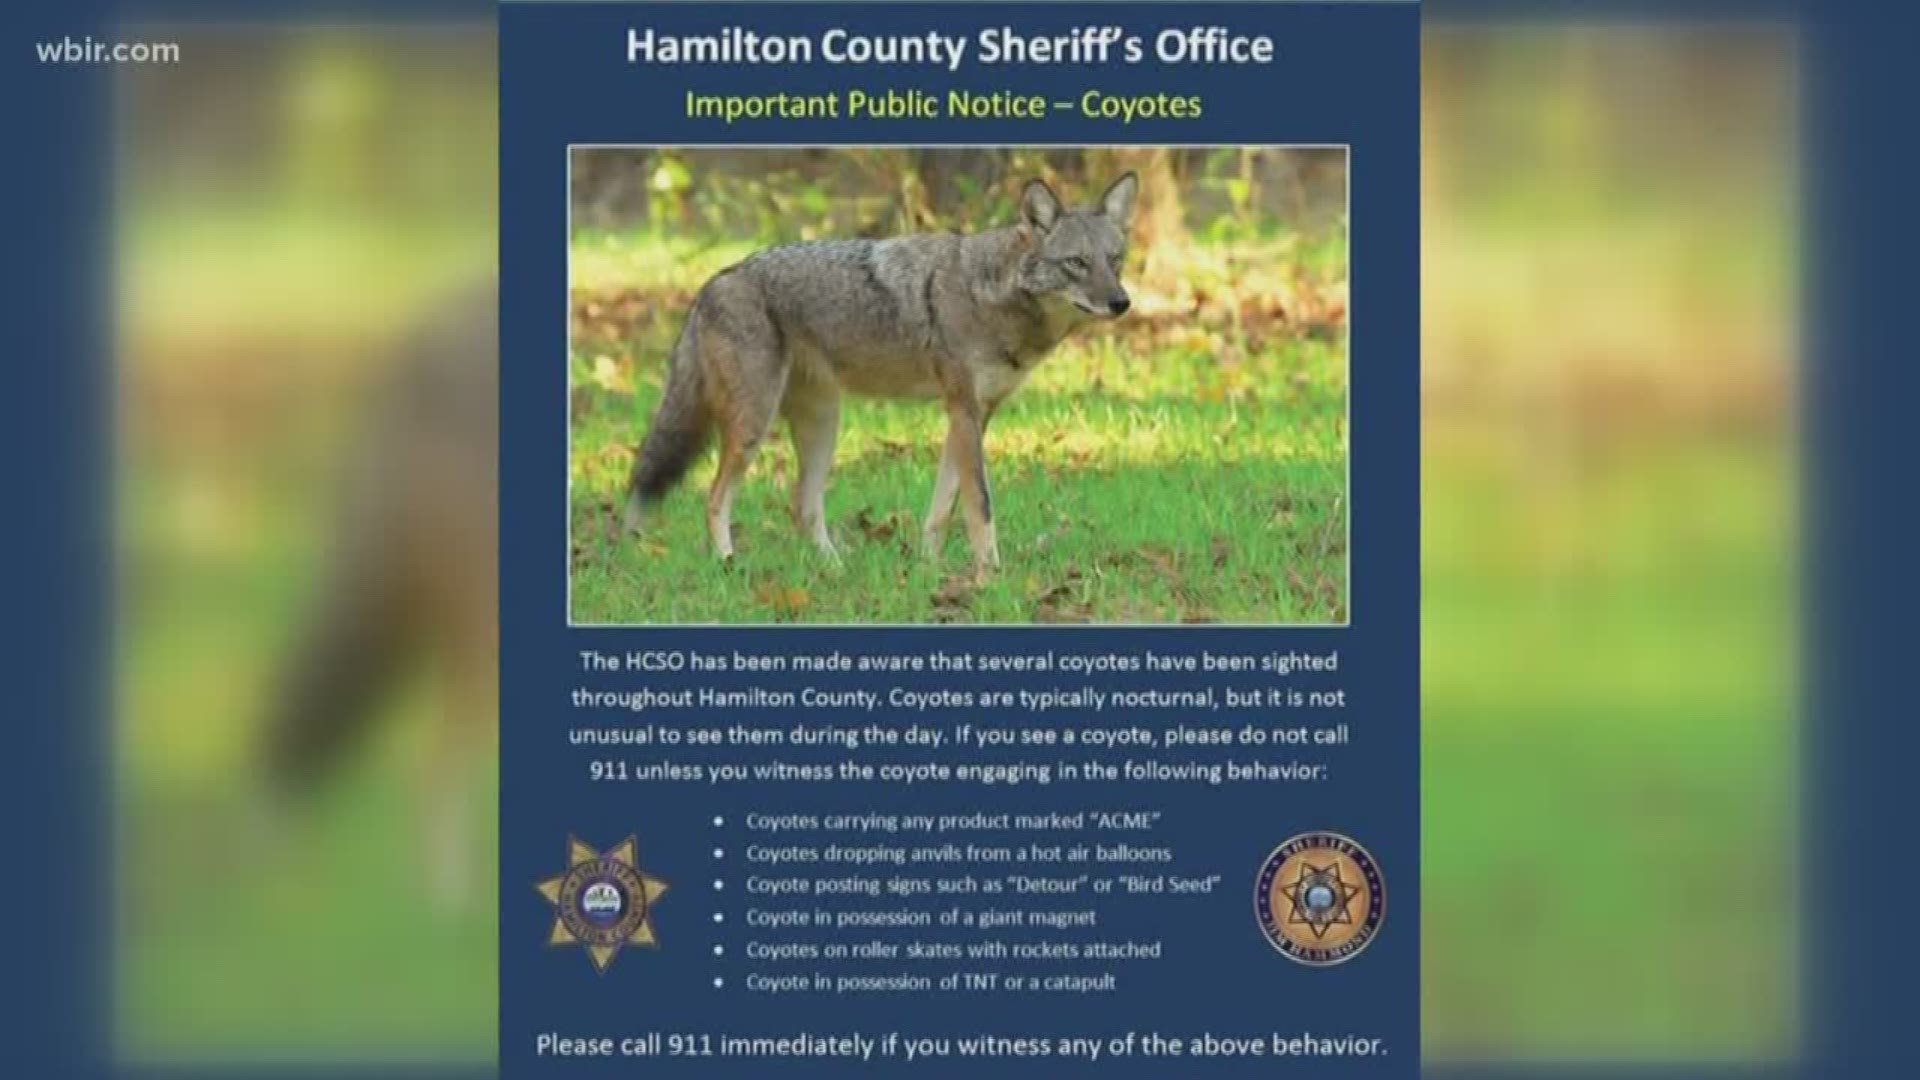 The HCSO was getting lots of calls about coyote sightings, so they released a public notice asking the public not to call 911 about coyotes, unless, of course, the coyotes are carrying ACME anvils.